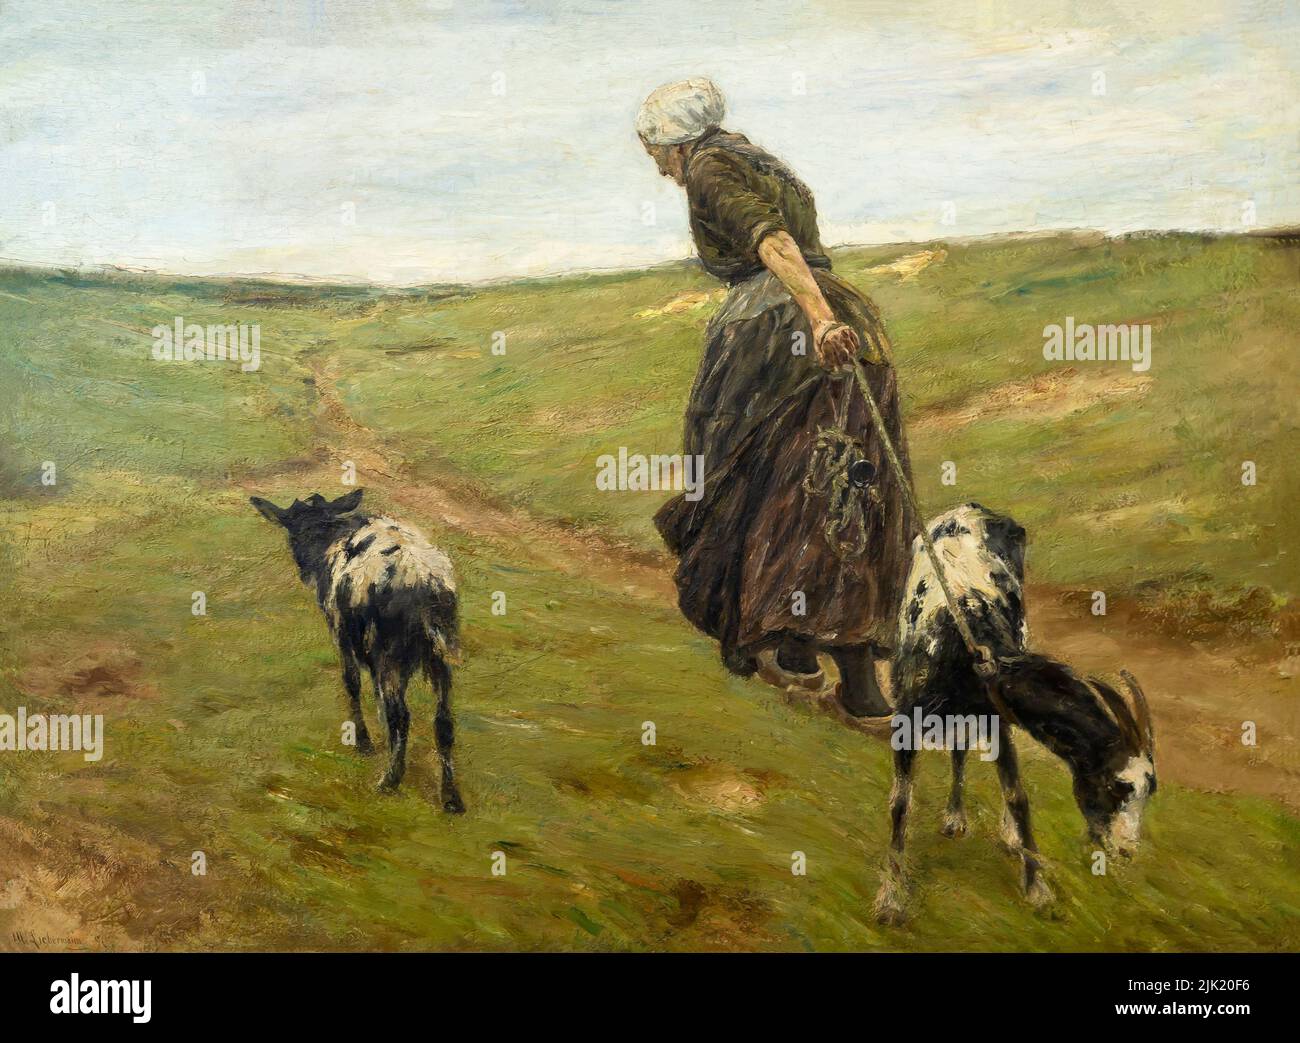 Woman and her Goats in the Dunes, Max Liebermann, 1890, Neue Pinakothek, Munich, Germany, Europe Stock Photo